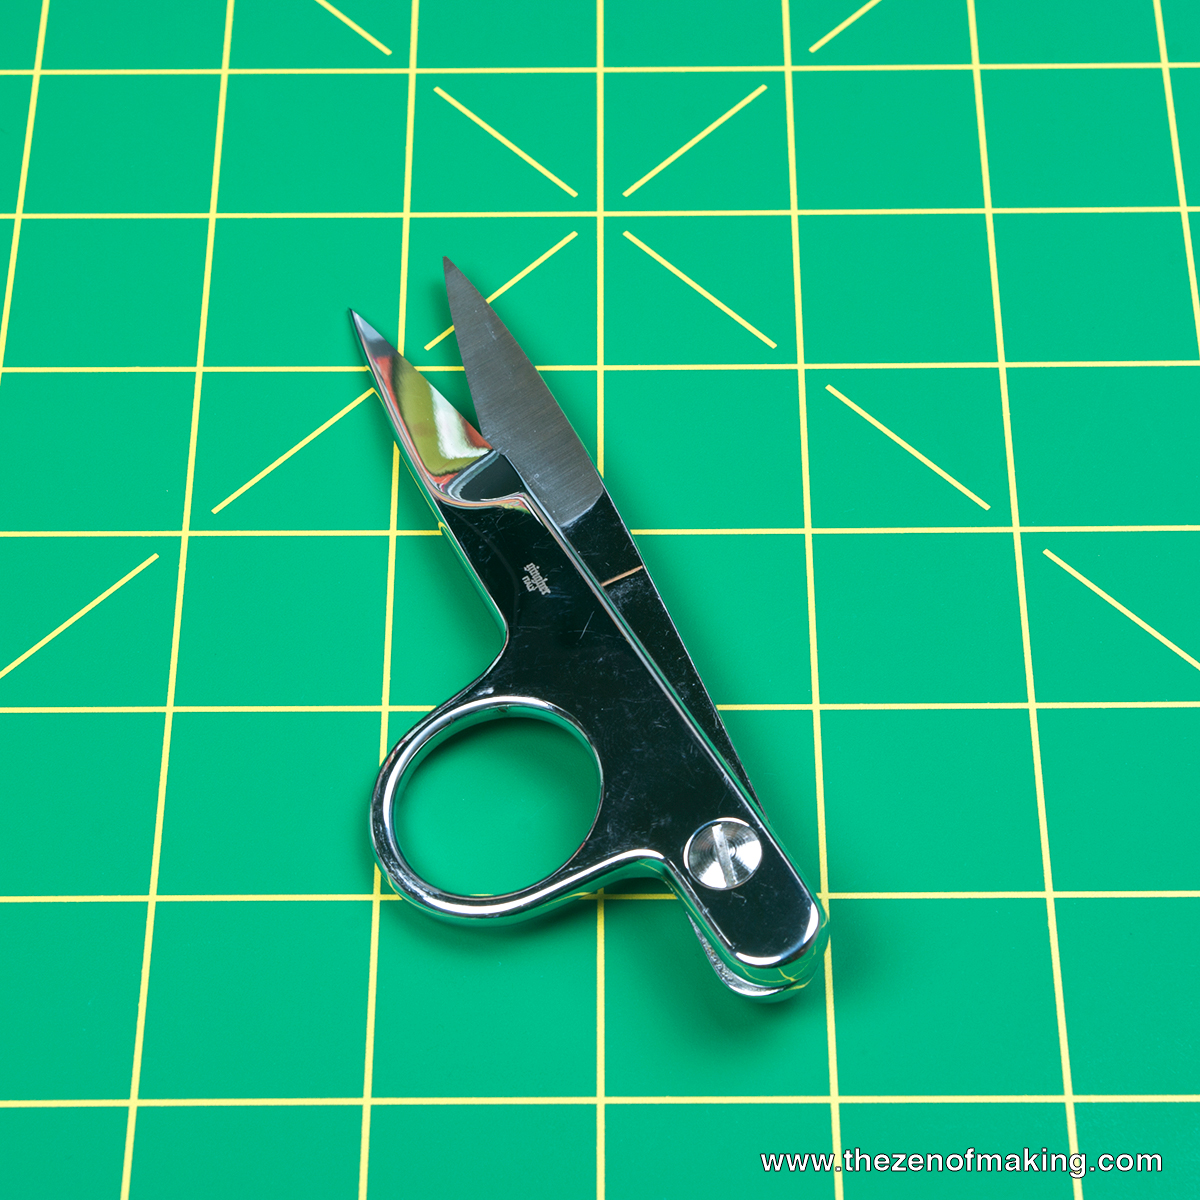 Tools: How to Use Thread Snips